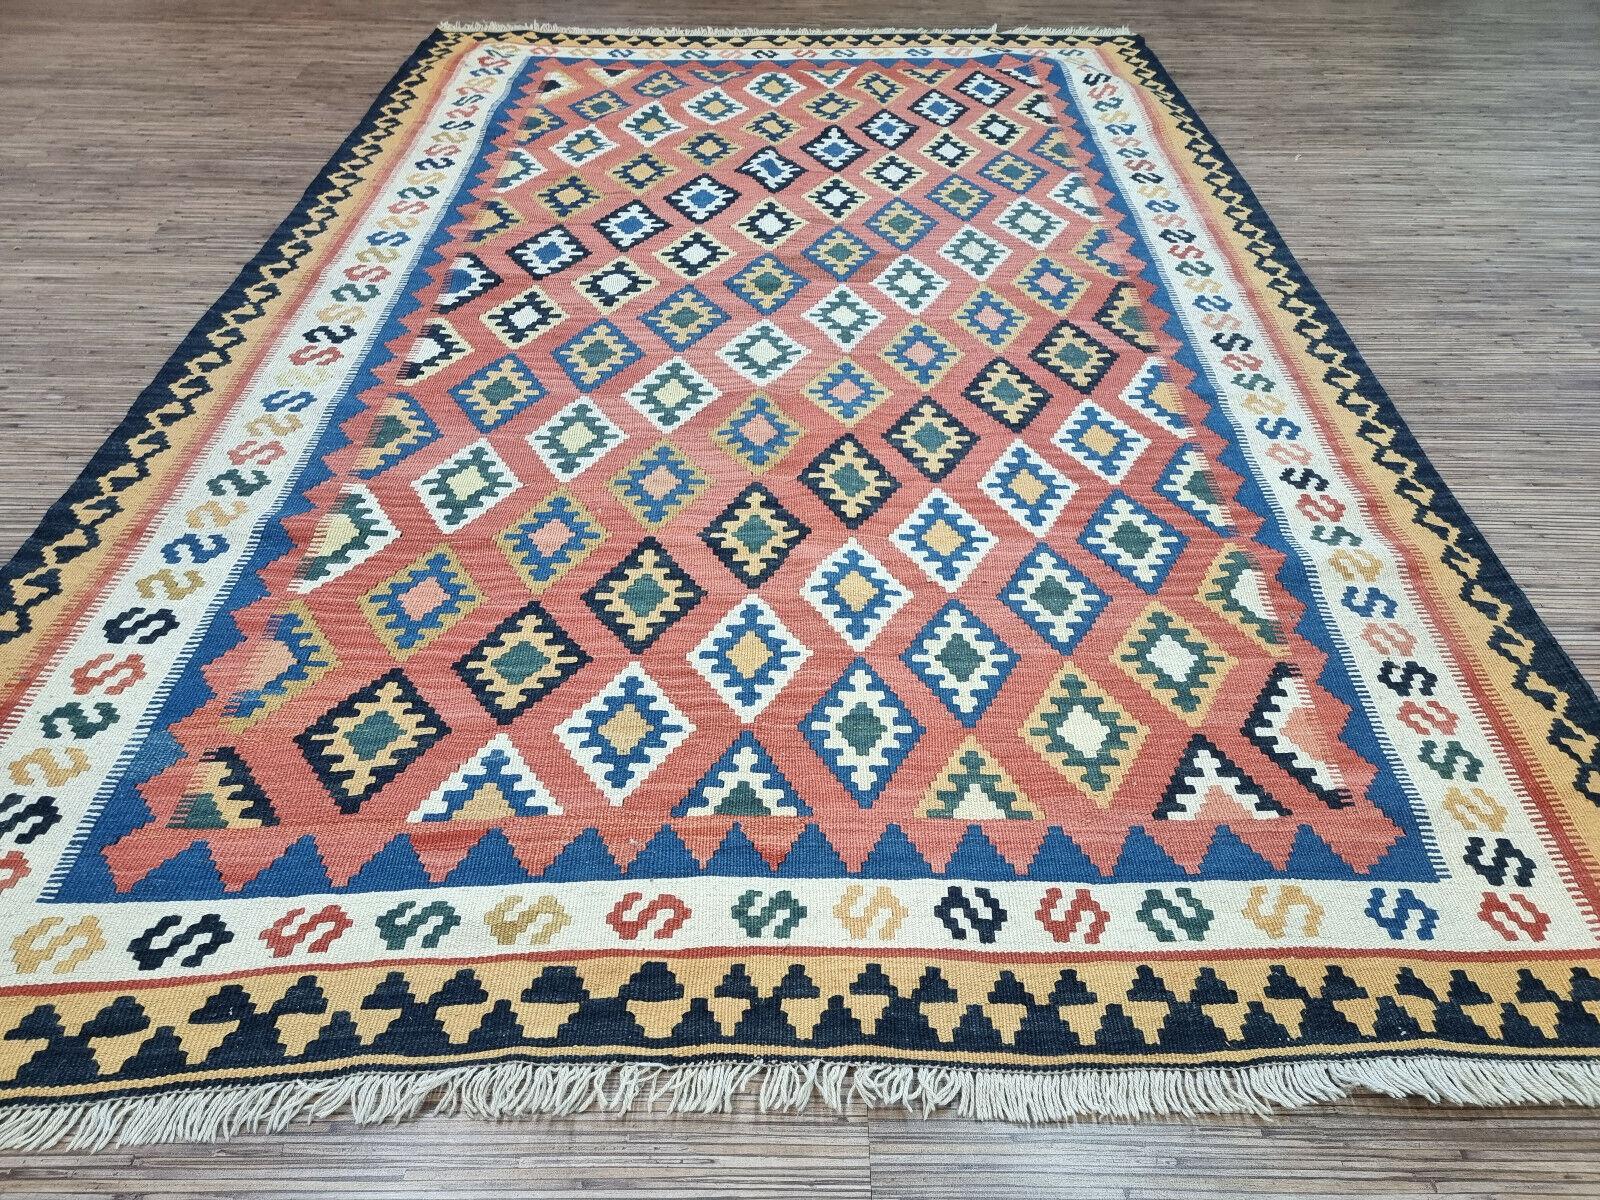 Hand-Knotted Handmade Vintage Persian Style Ardabil Kilim Rug 4.9' x 7.2', 1970s - 1D91 For Sale